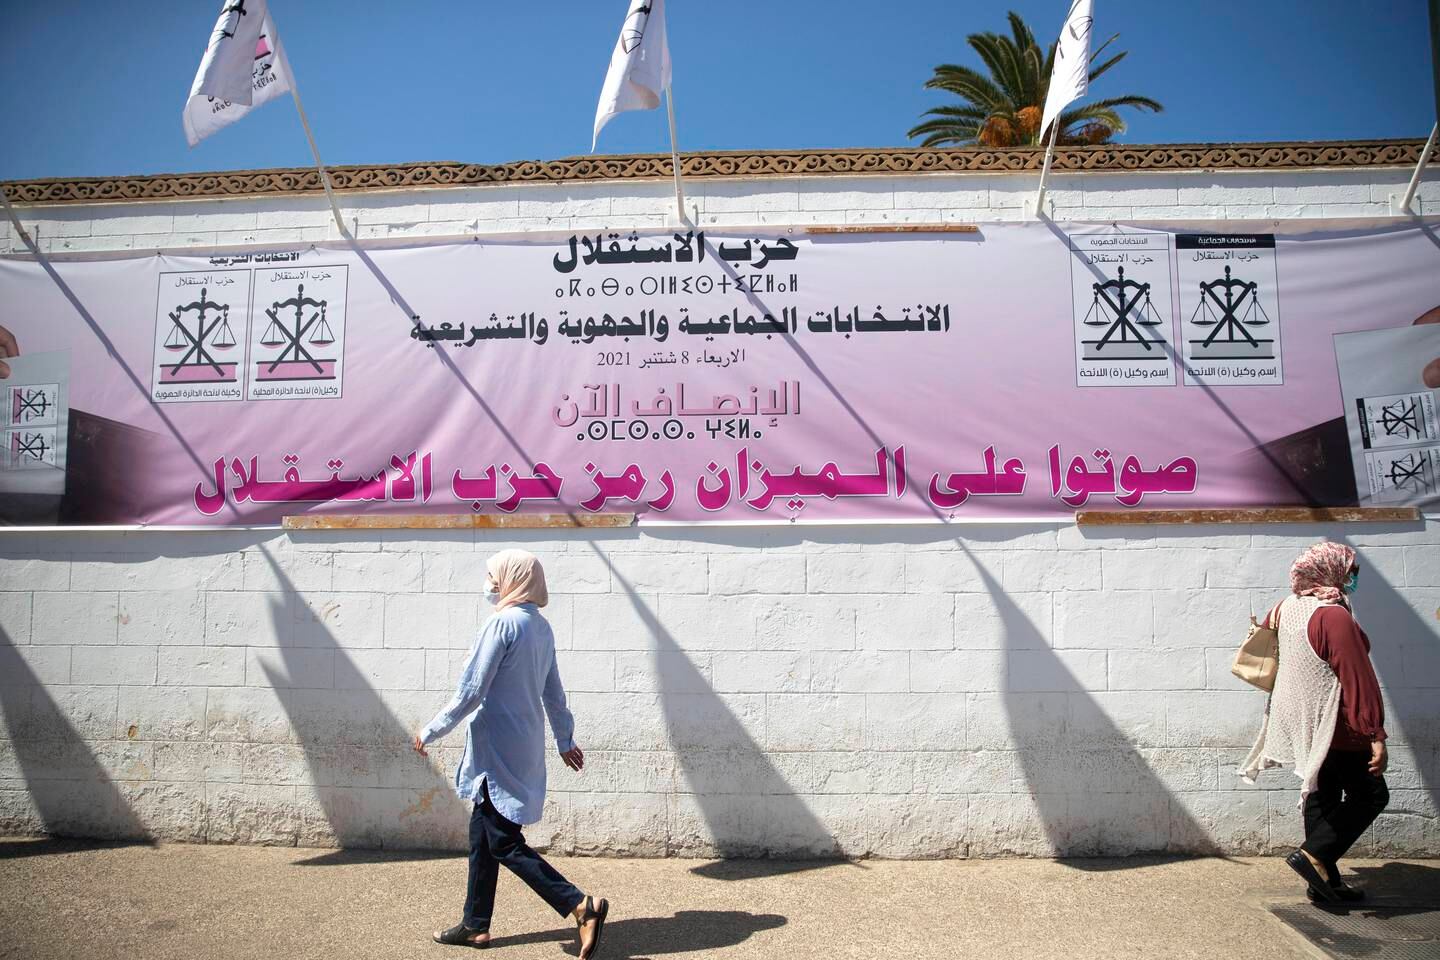 Millions of Moroccans head to the polls on September 8 to cast ballots in pivotal legislative and regional elections amid strict safety guidelines for Covid-19. AFP